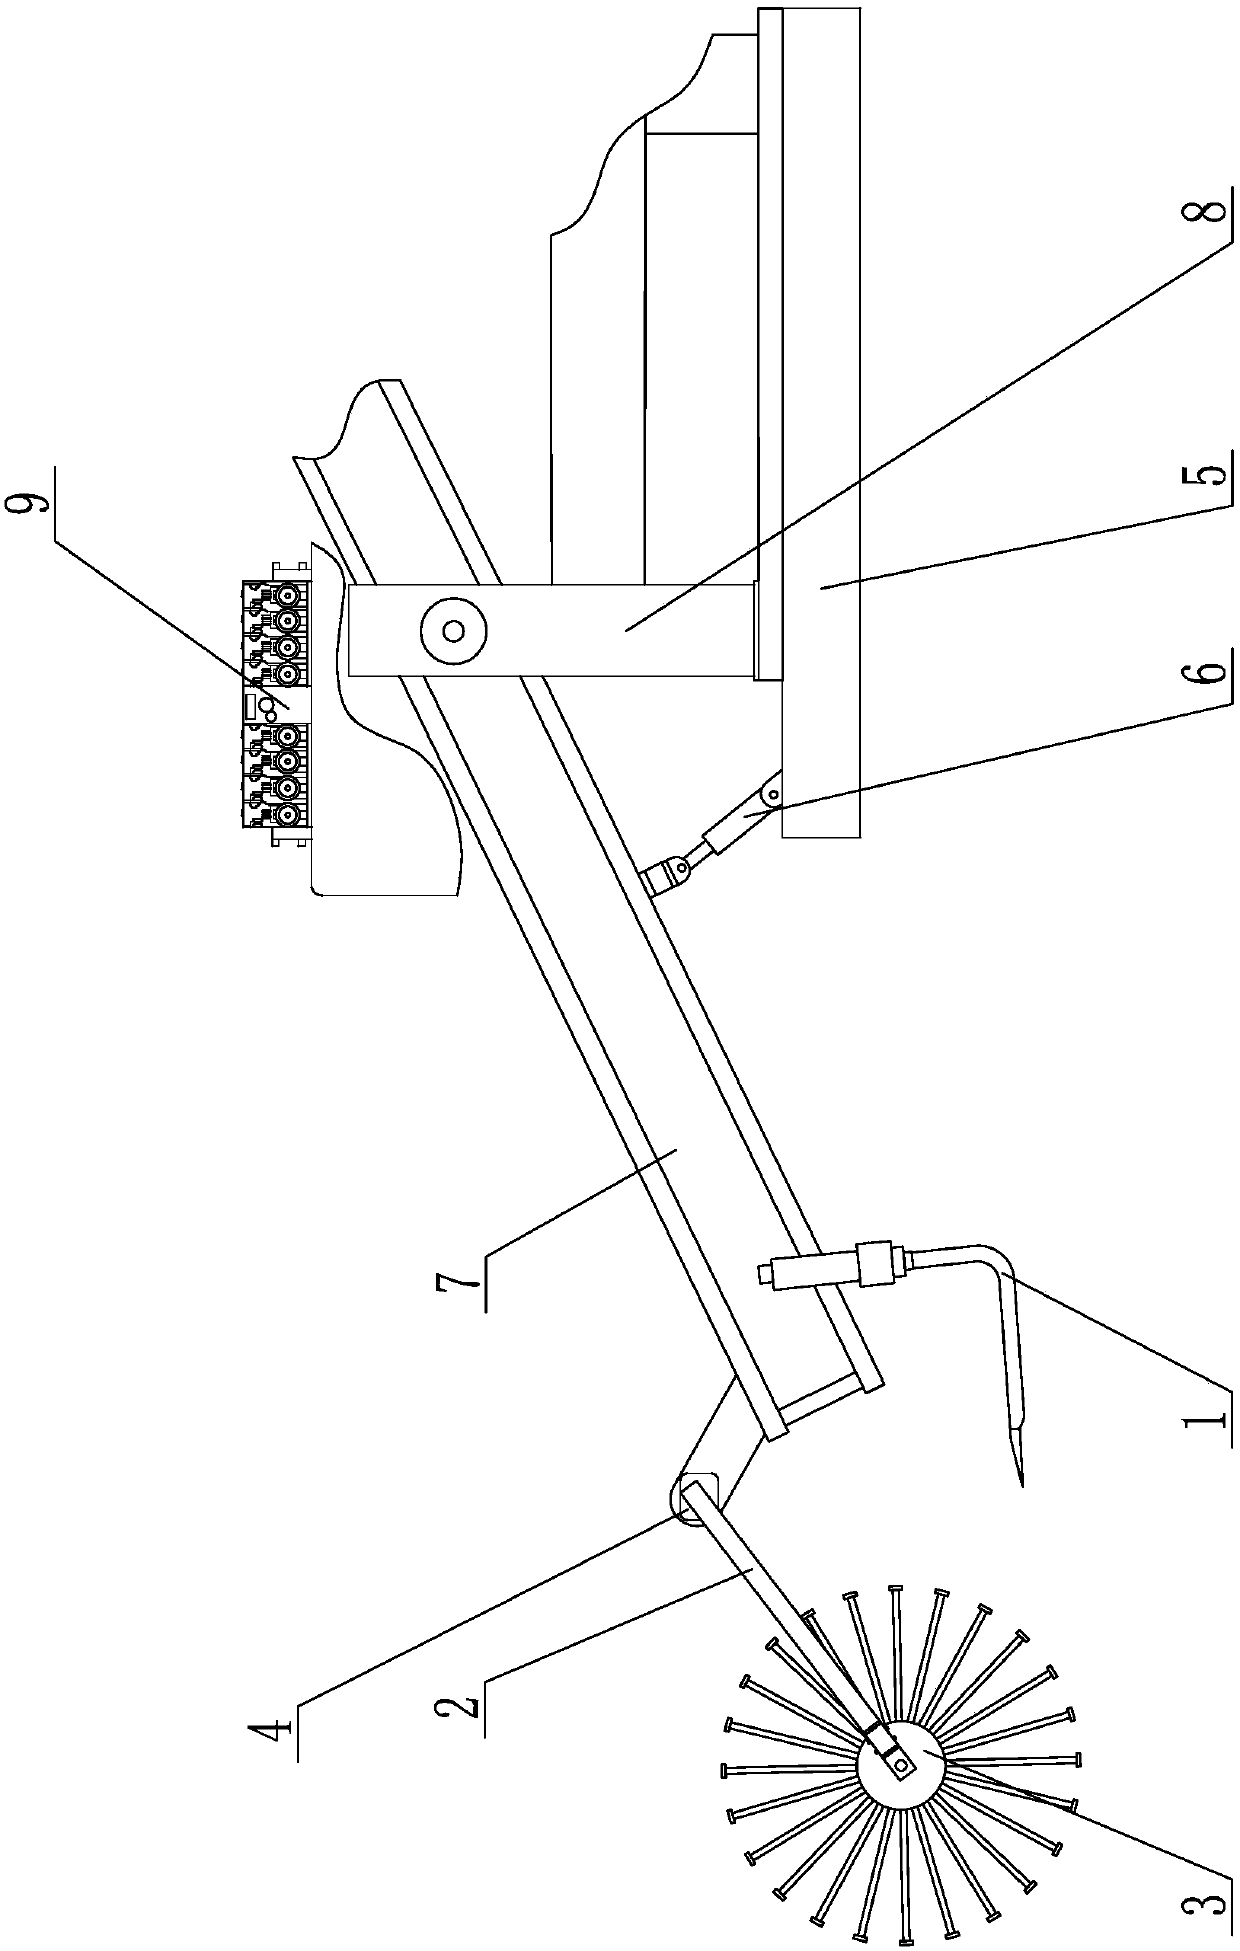 Ground-contour-following device for peanut harvester